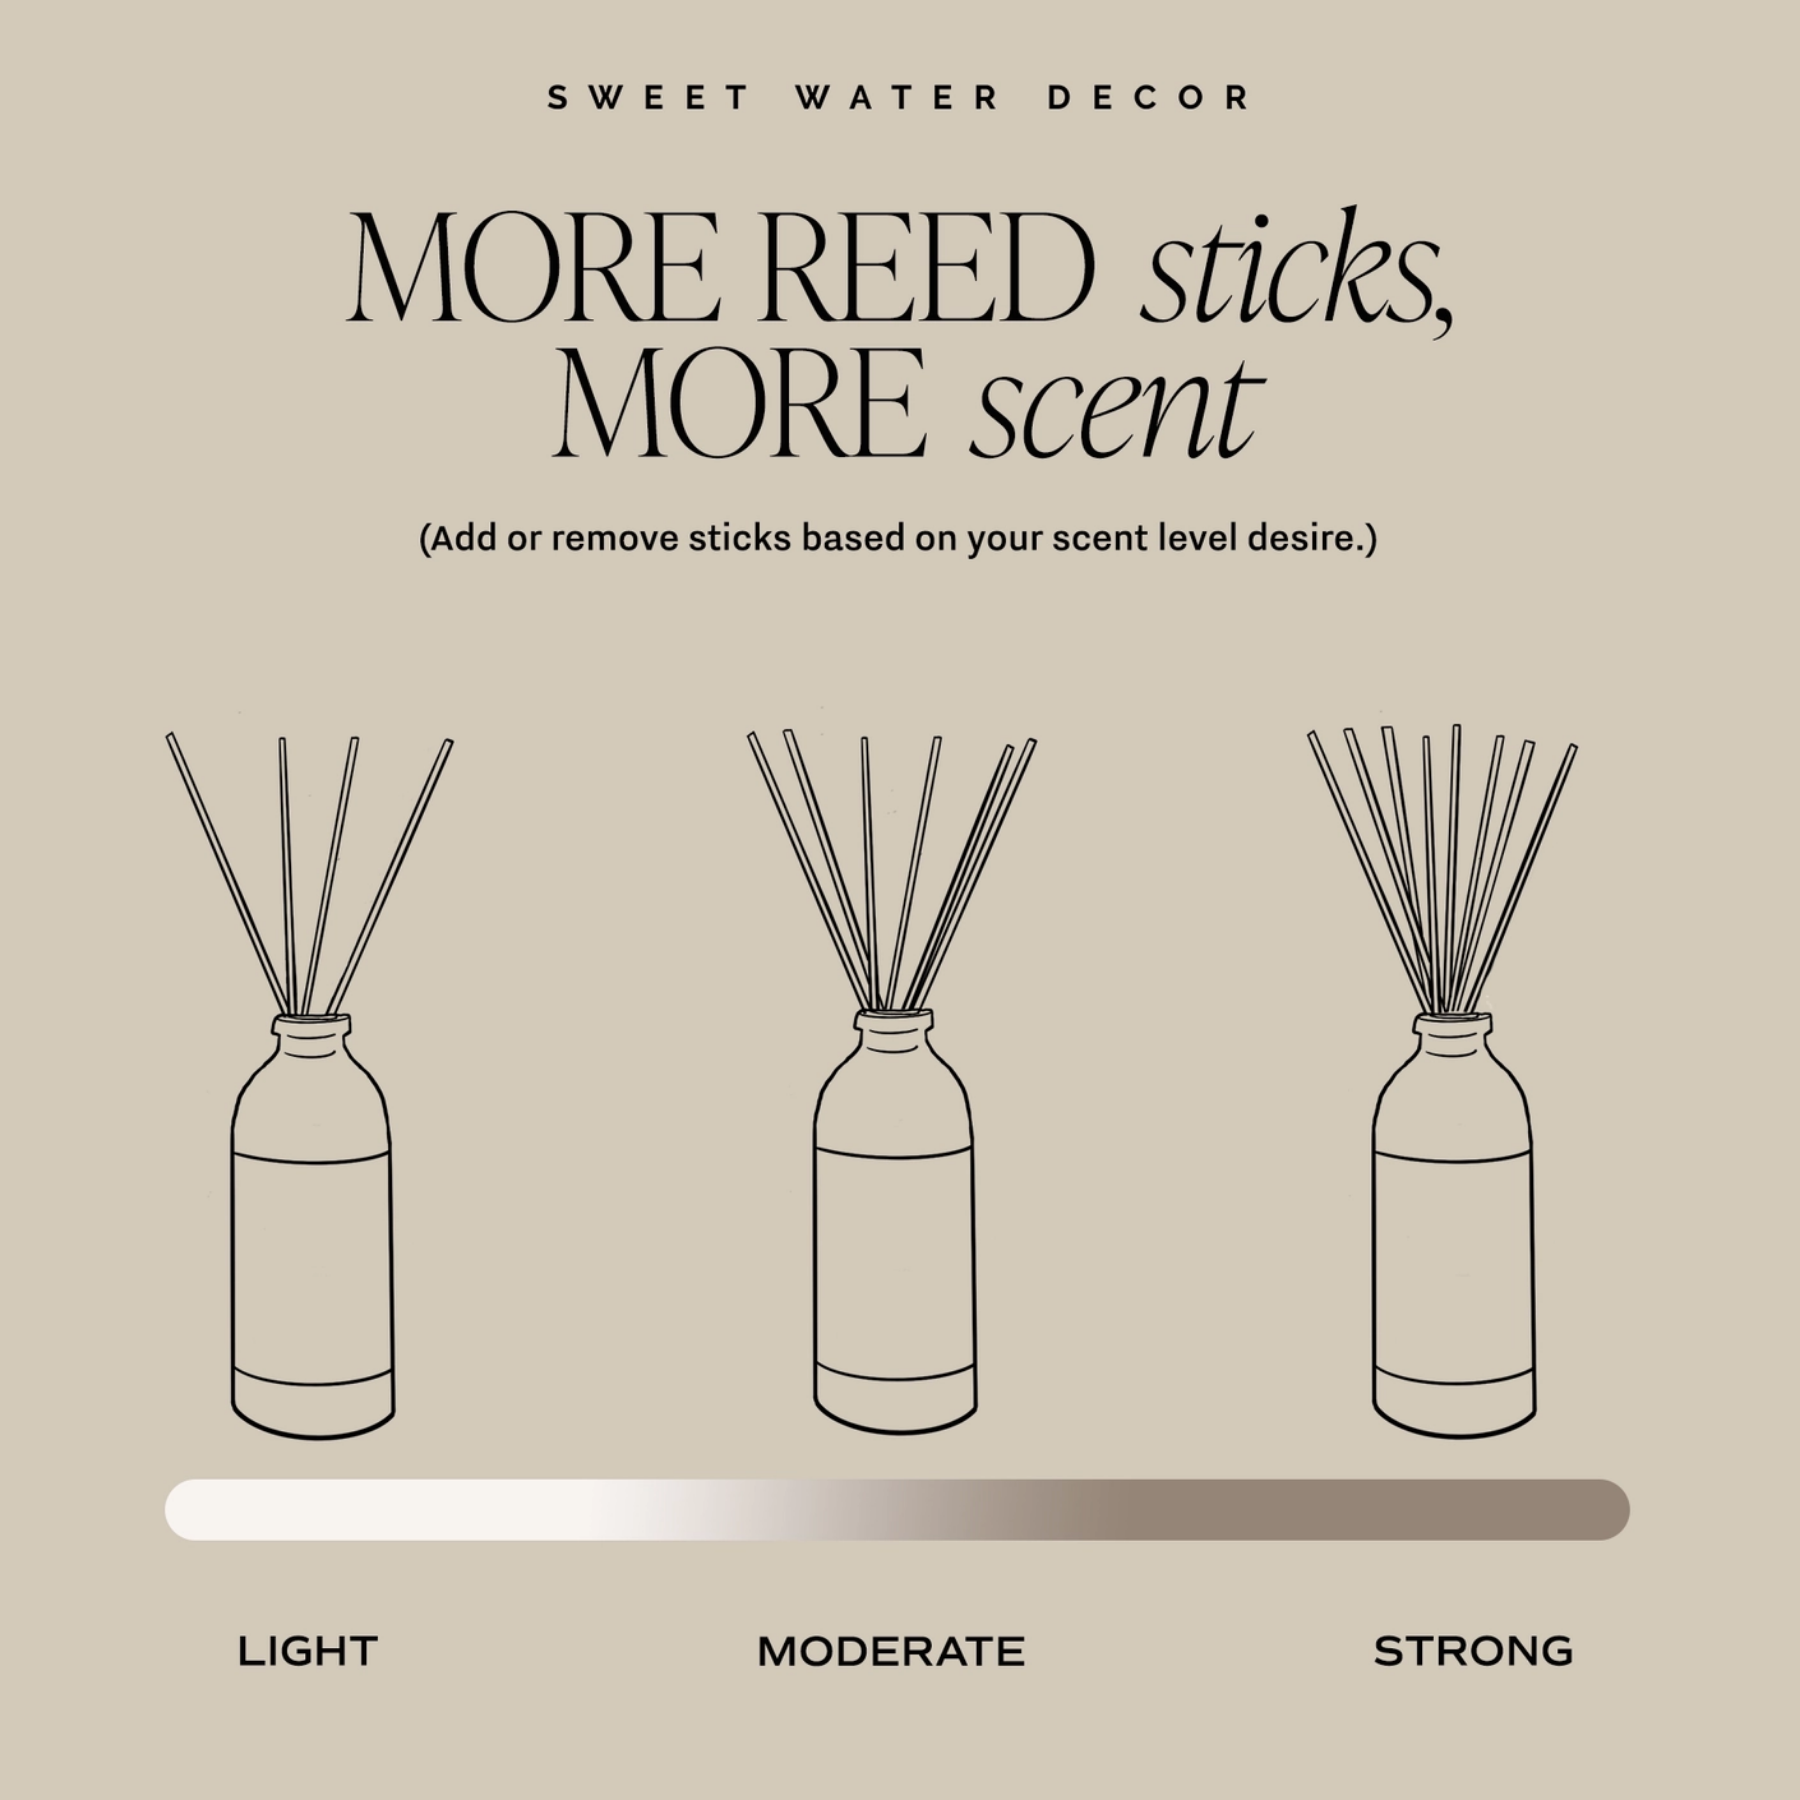 Stress Relief Reed Diffuser Instructions